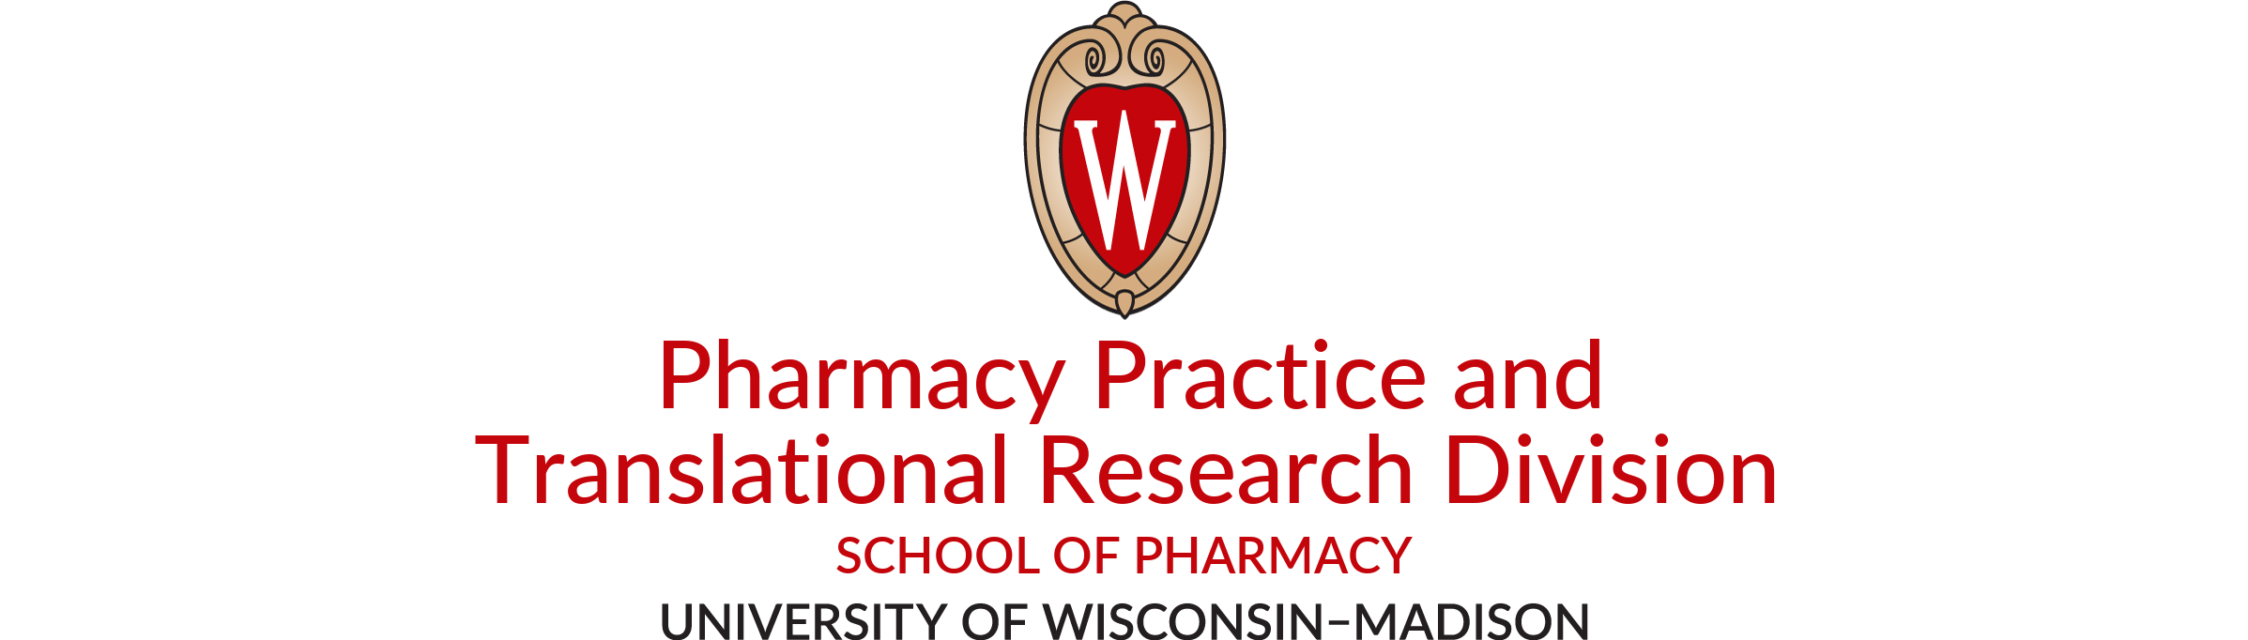 Pharmacy Practice and Translational Research Division logo